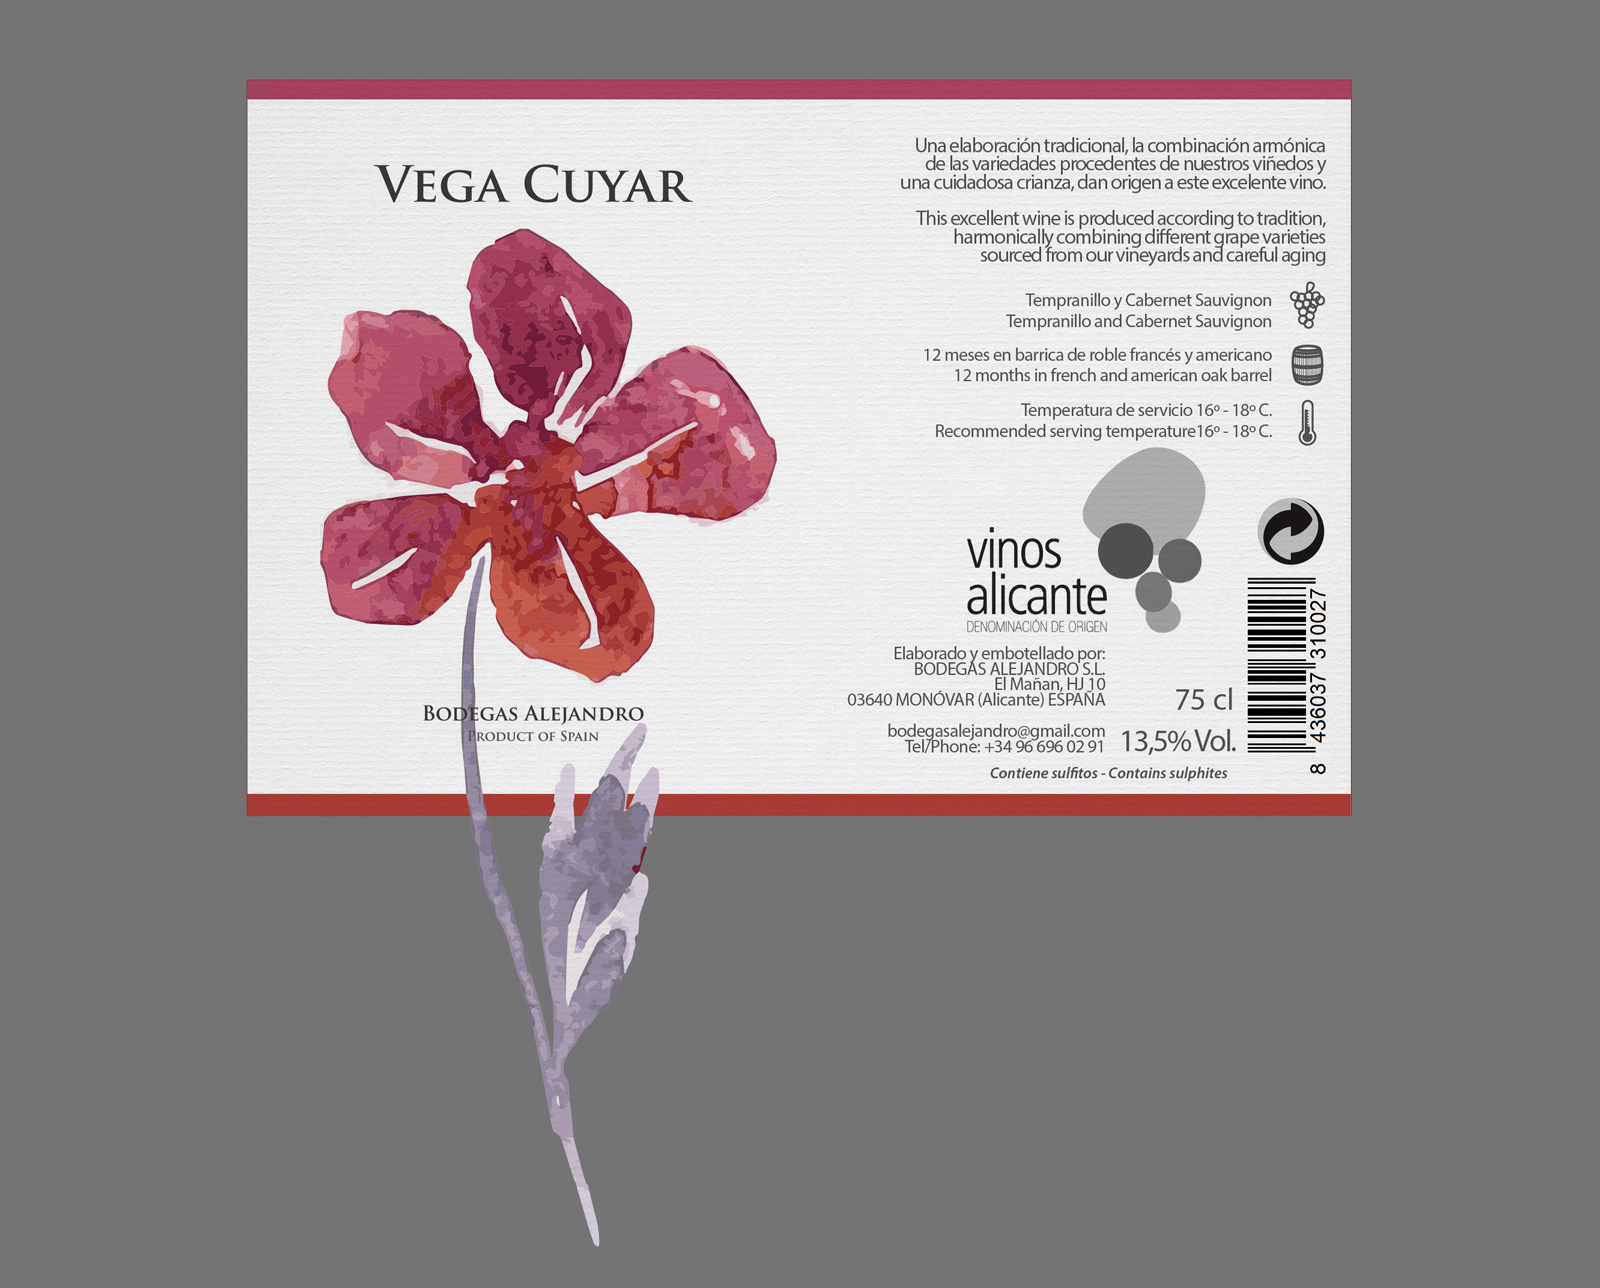 Portfolio of graphic and creative design works on wine labels and packaging for Spanish wine: VEGA CUYAR